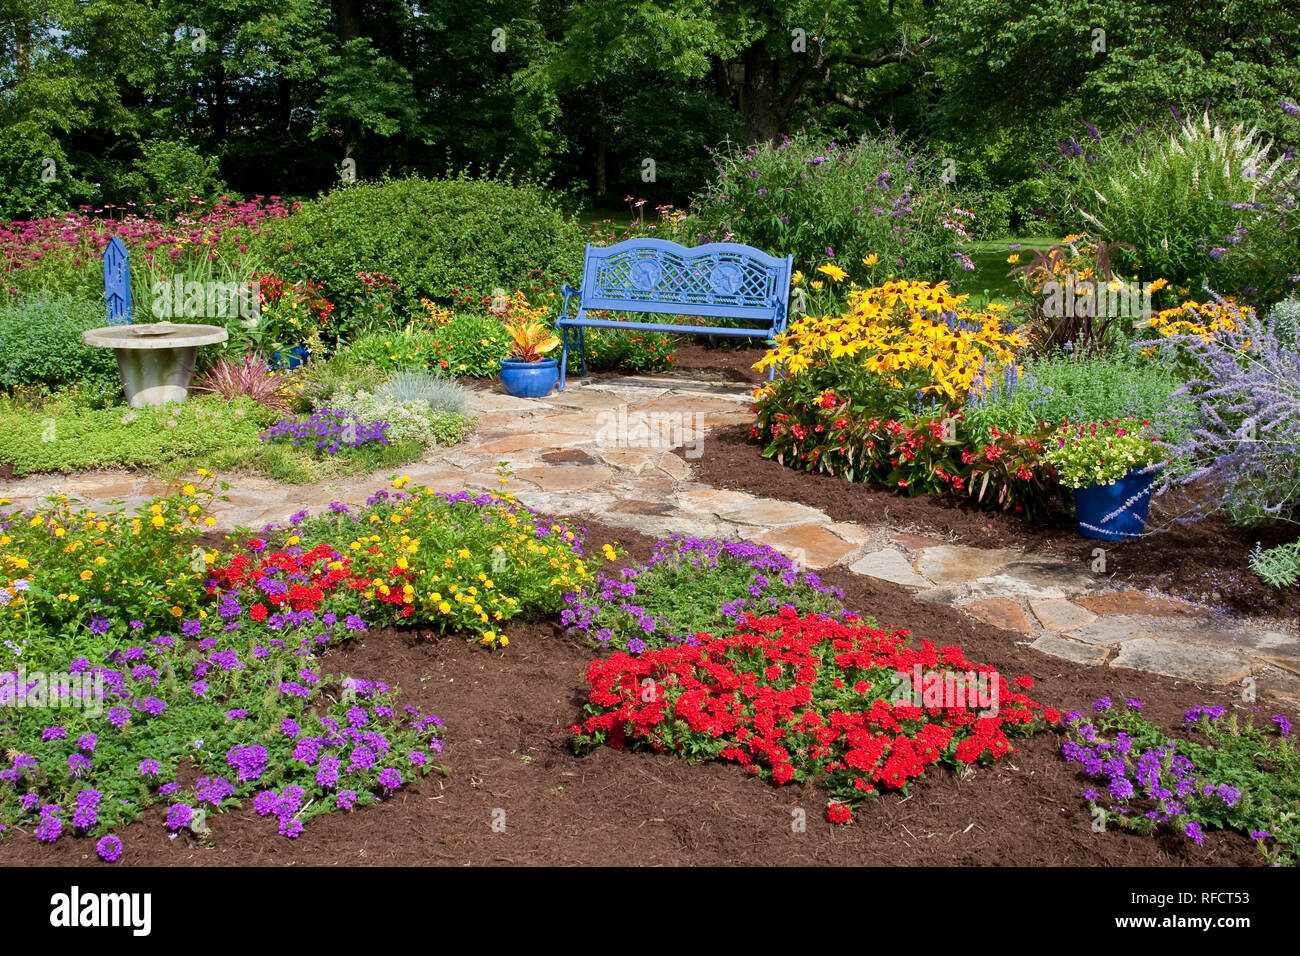 63821-21717 Blue bench, blue pots, butterfly house, bird bath and stone path in flower garden.  Black-eyed Susans (Rudbeckia hirta) Red Dragon Wing Be Stock Photo